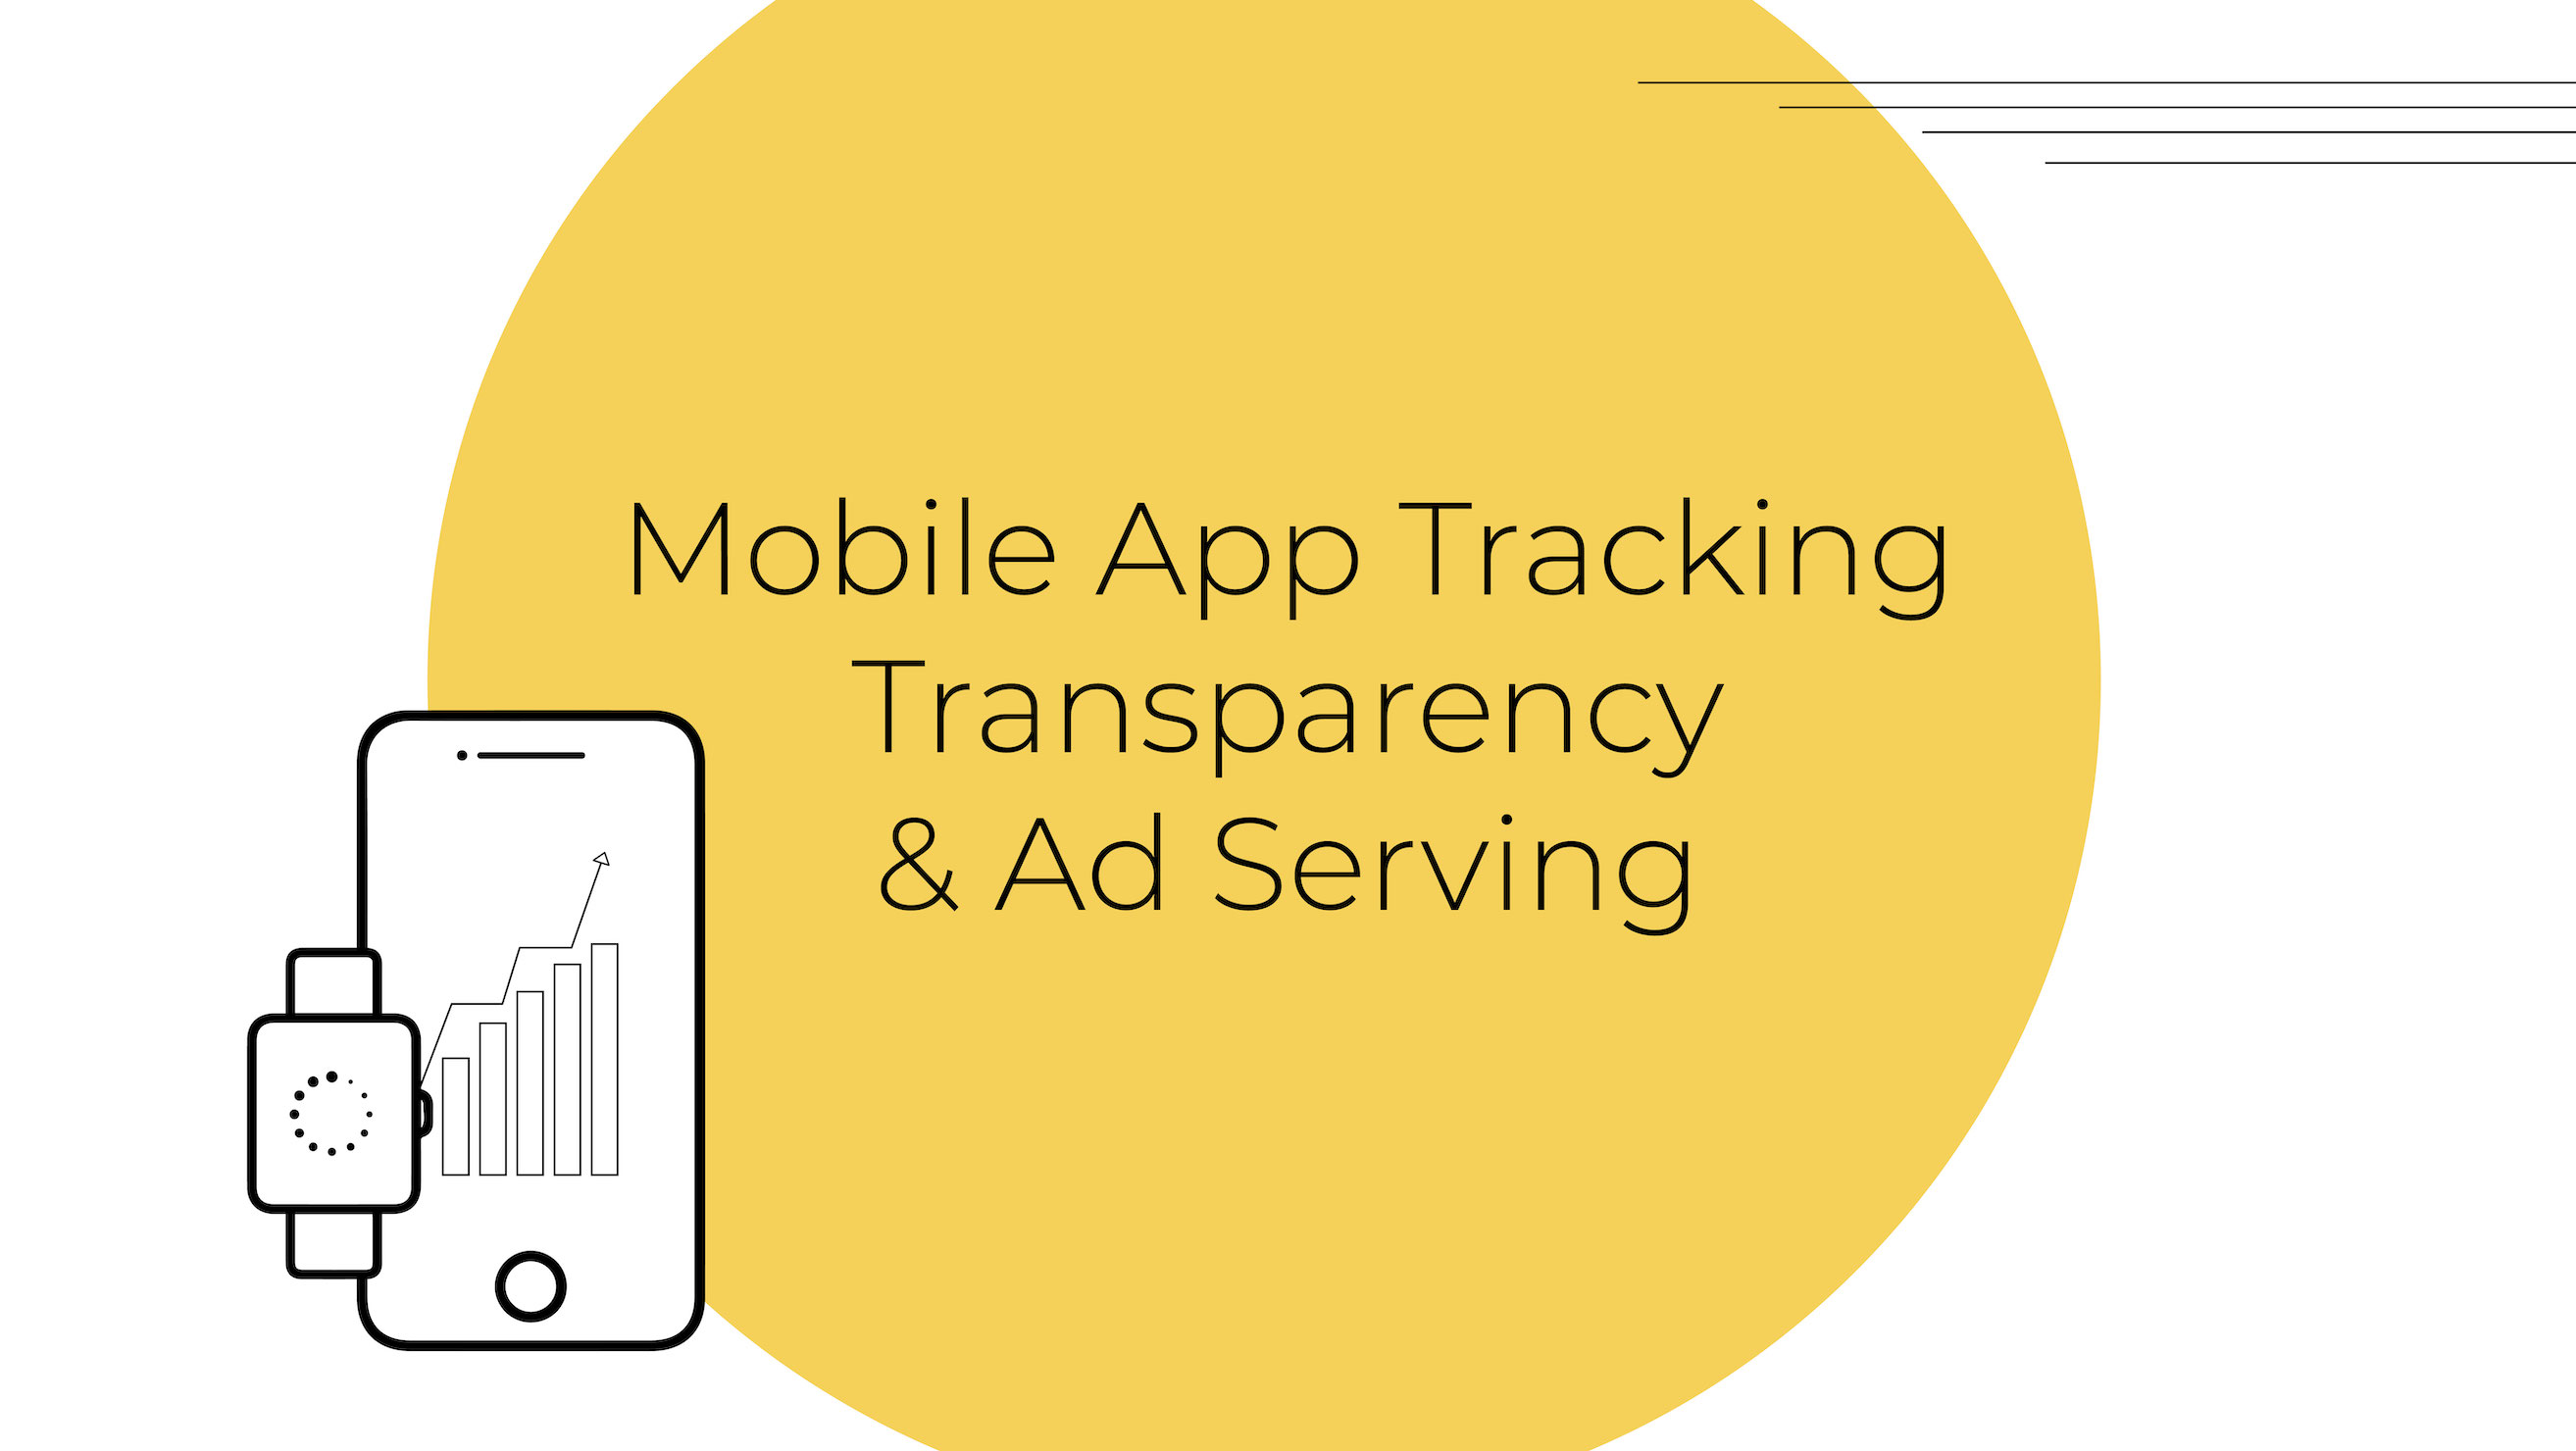 What To Know About Mobile App Tracking & Ad Serving